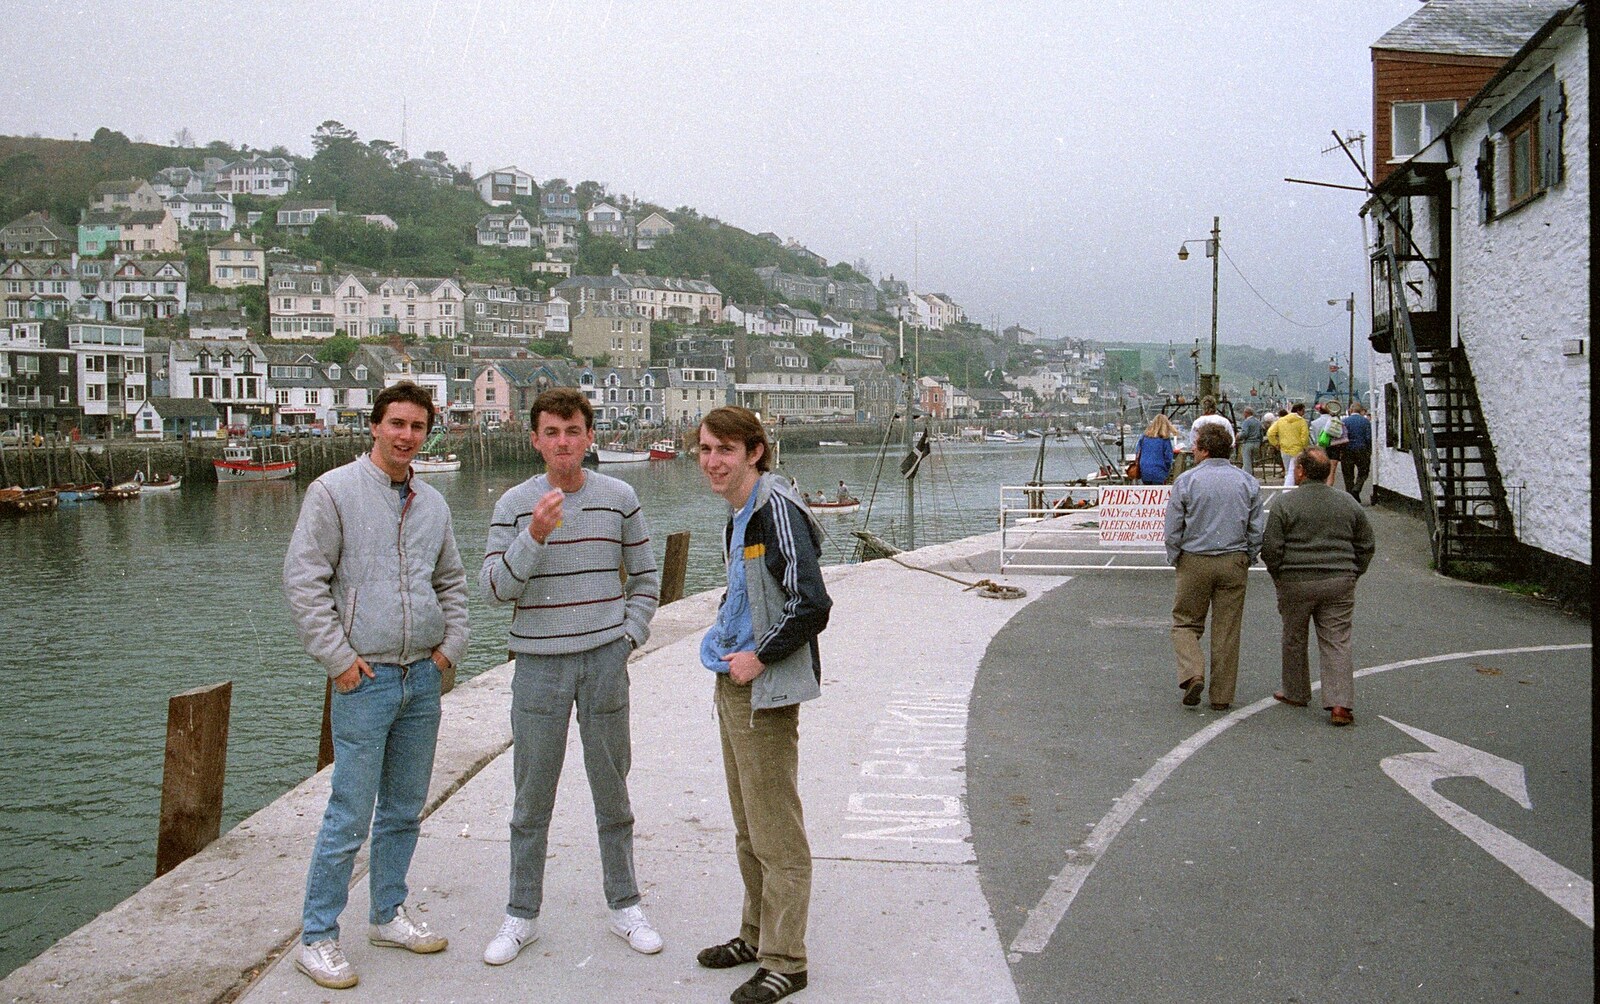 Riki, John Stewart and Dave down by the harbour in Looe from Uni: A Plymouth Hoe Kickabout, Plymouth, Devon - 20th October 1986